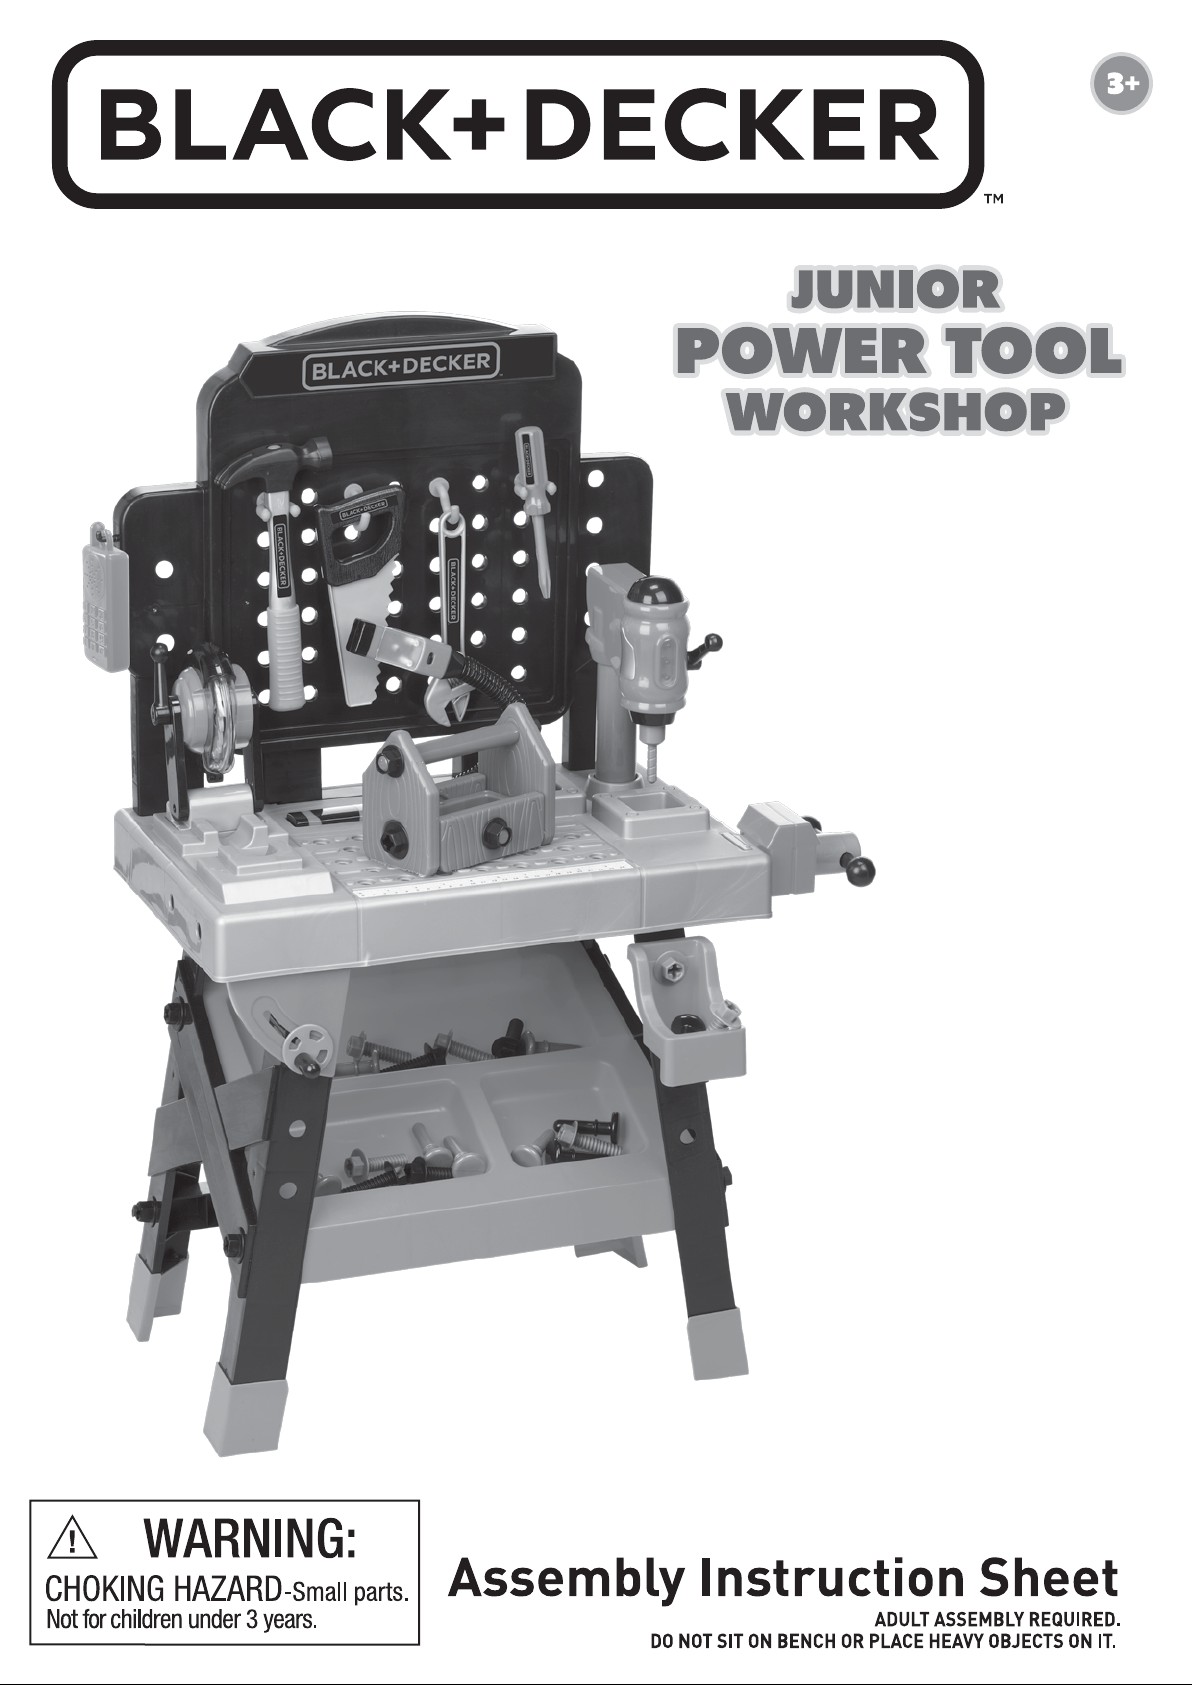 BLACK and DECKER Junior Power Workbench Workshop with 64 Tools & Acces